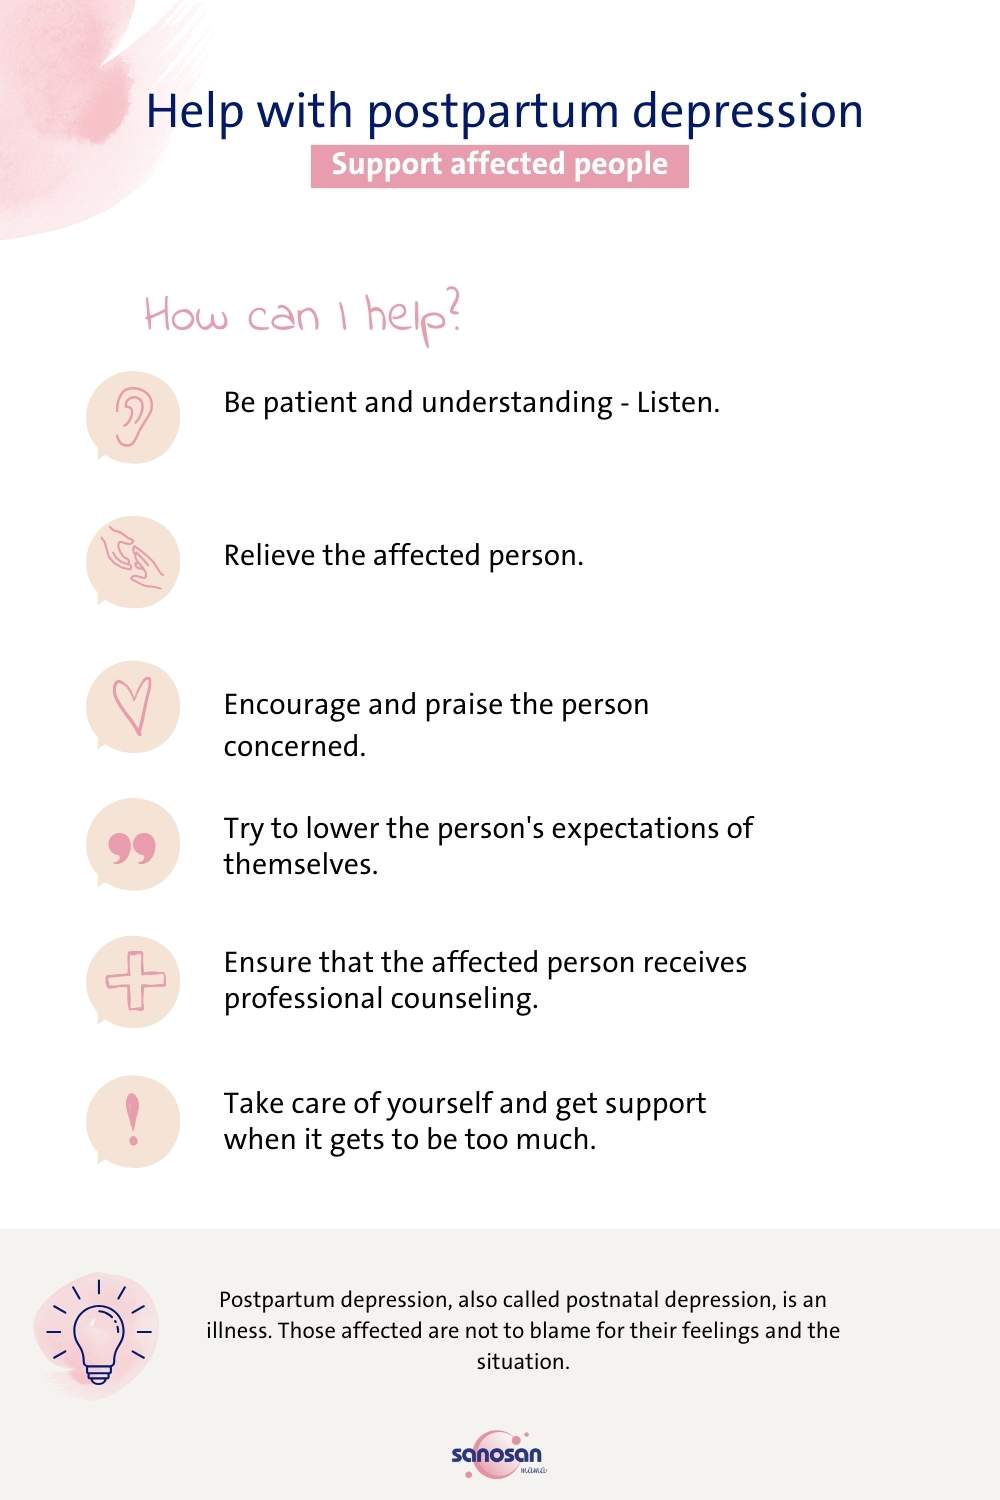 infographic on tips for help with postpartal depression